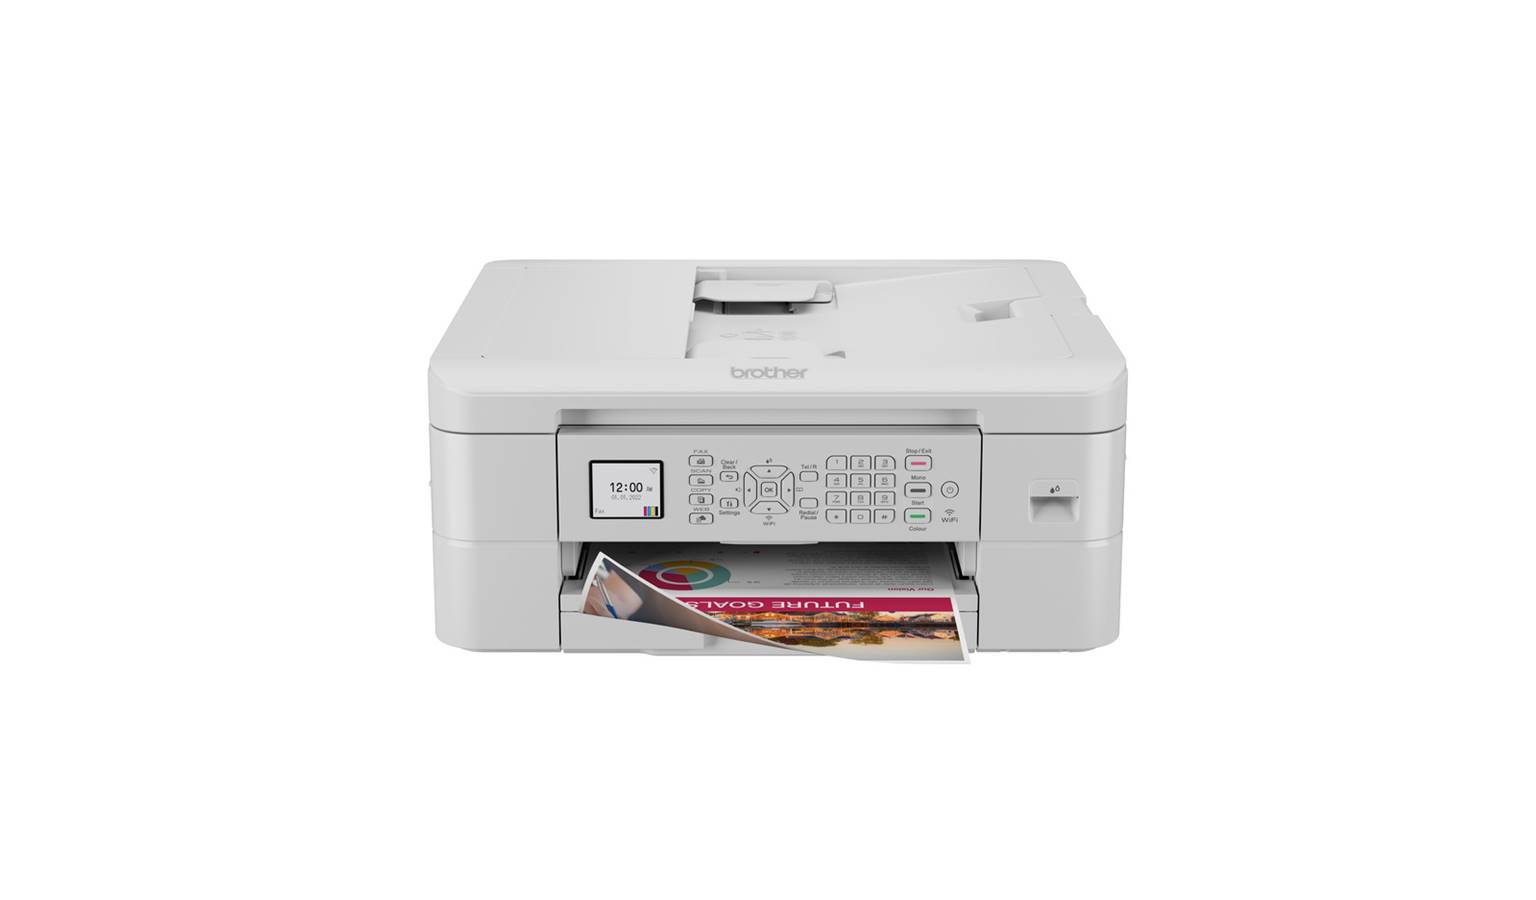 Brother All-in-One Print-Scan-Copy Wireless Printer (MFC-J1010DW)